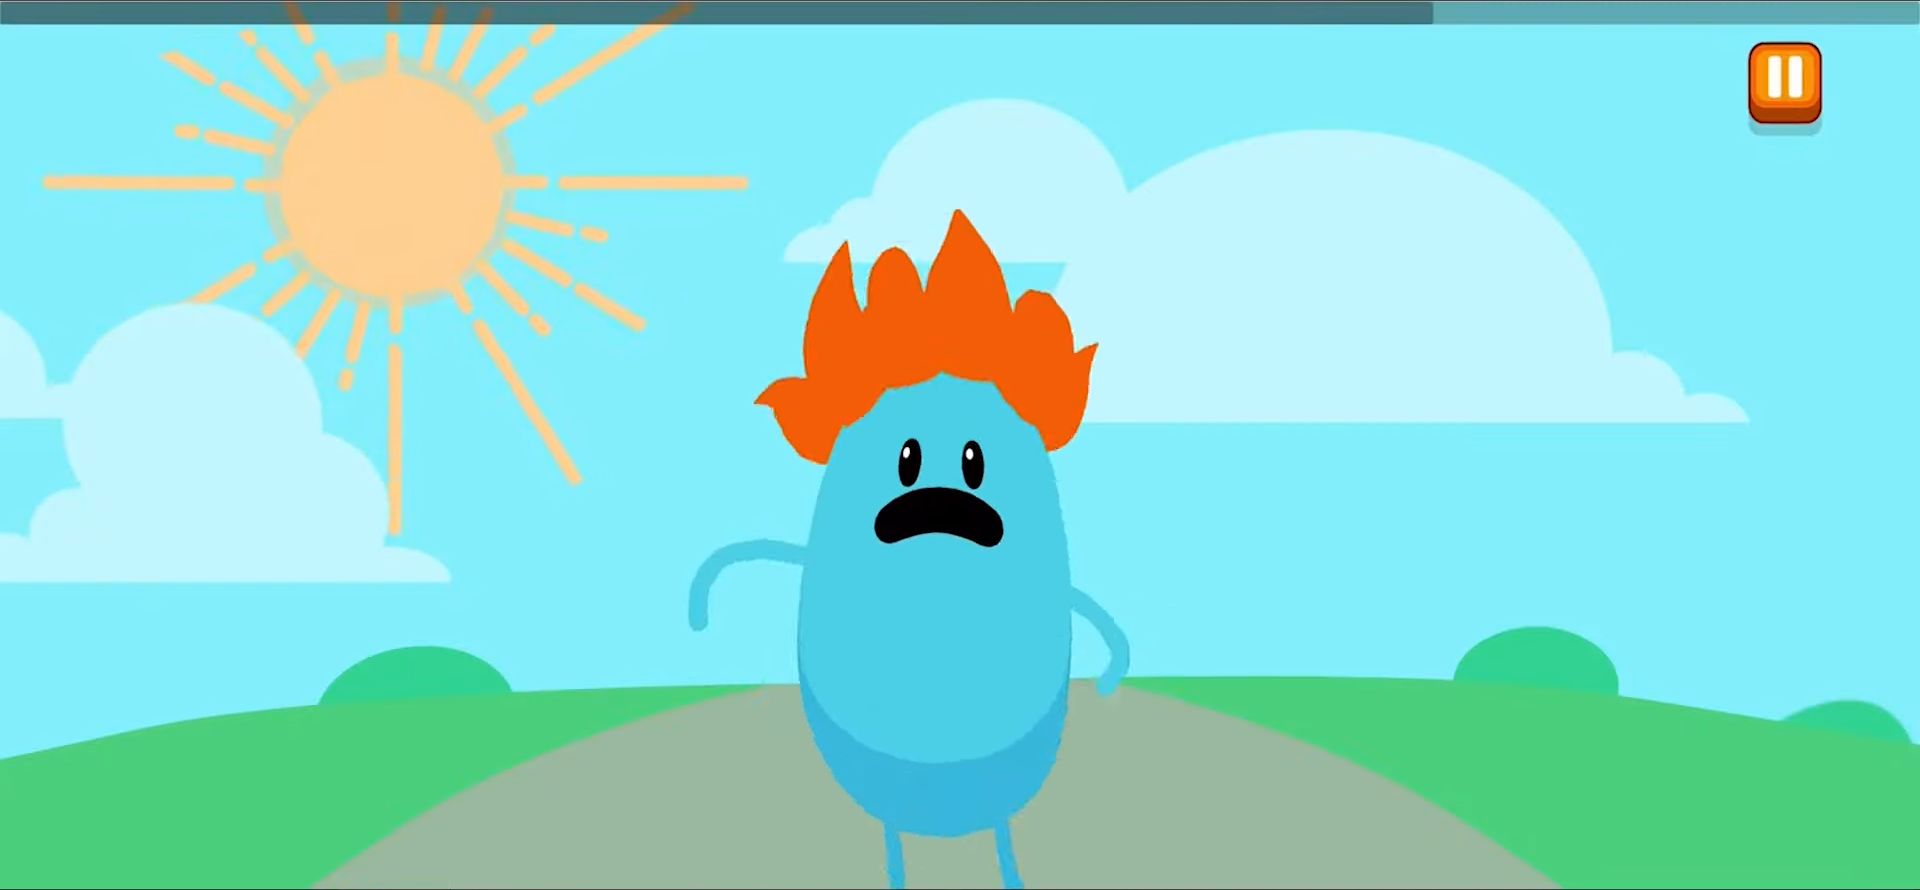 Download Dumb Ways to Die 4 Android free game.